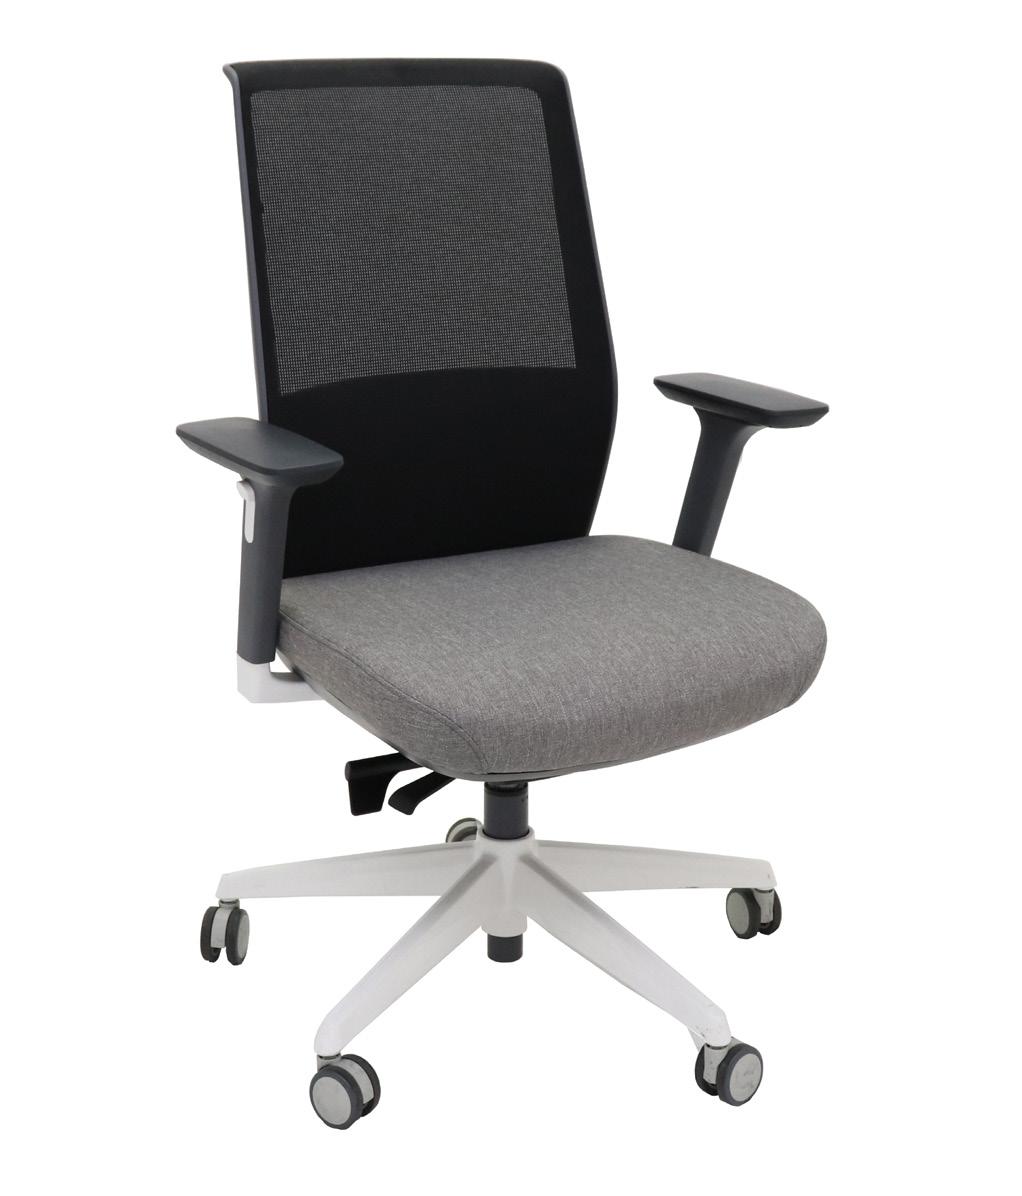 Motion Mesh Task Chair Elegant medium back mesh task chair. Donati-dopo weight sensitive. mechanism with 6 position seat slide 13 Kg weight rating. Black mesh back rest with light grey seat pan.